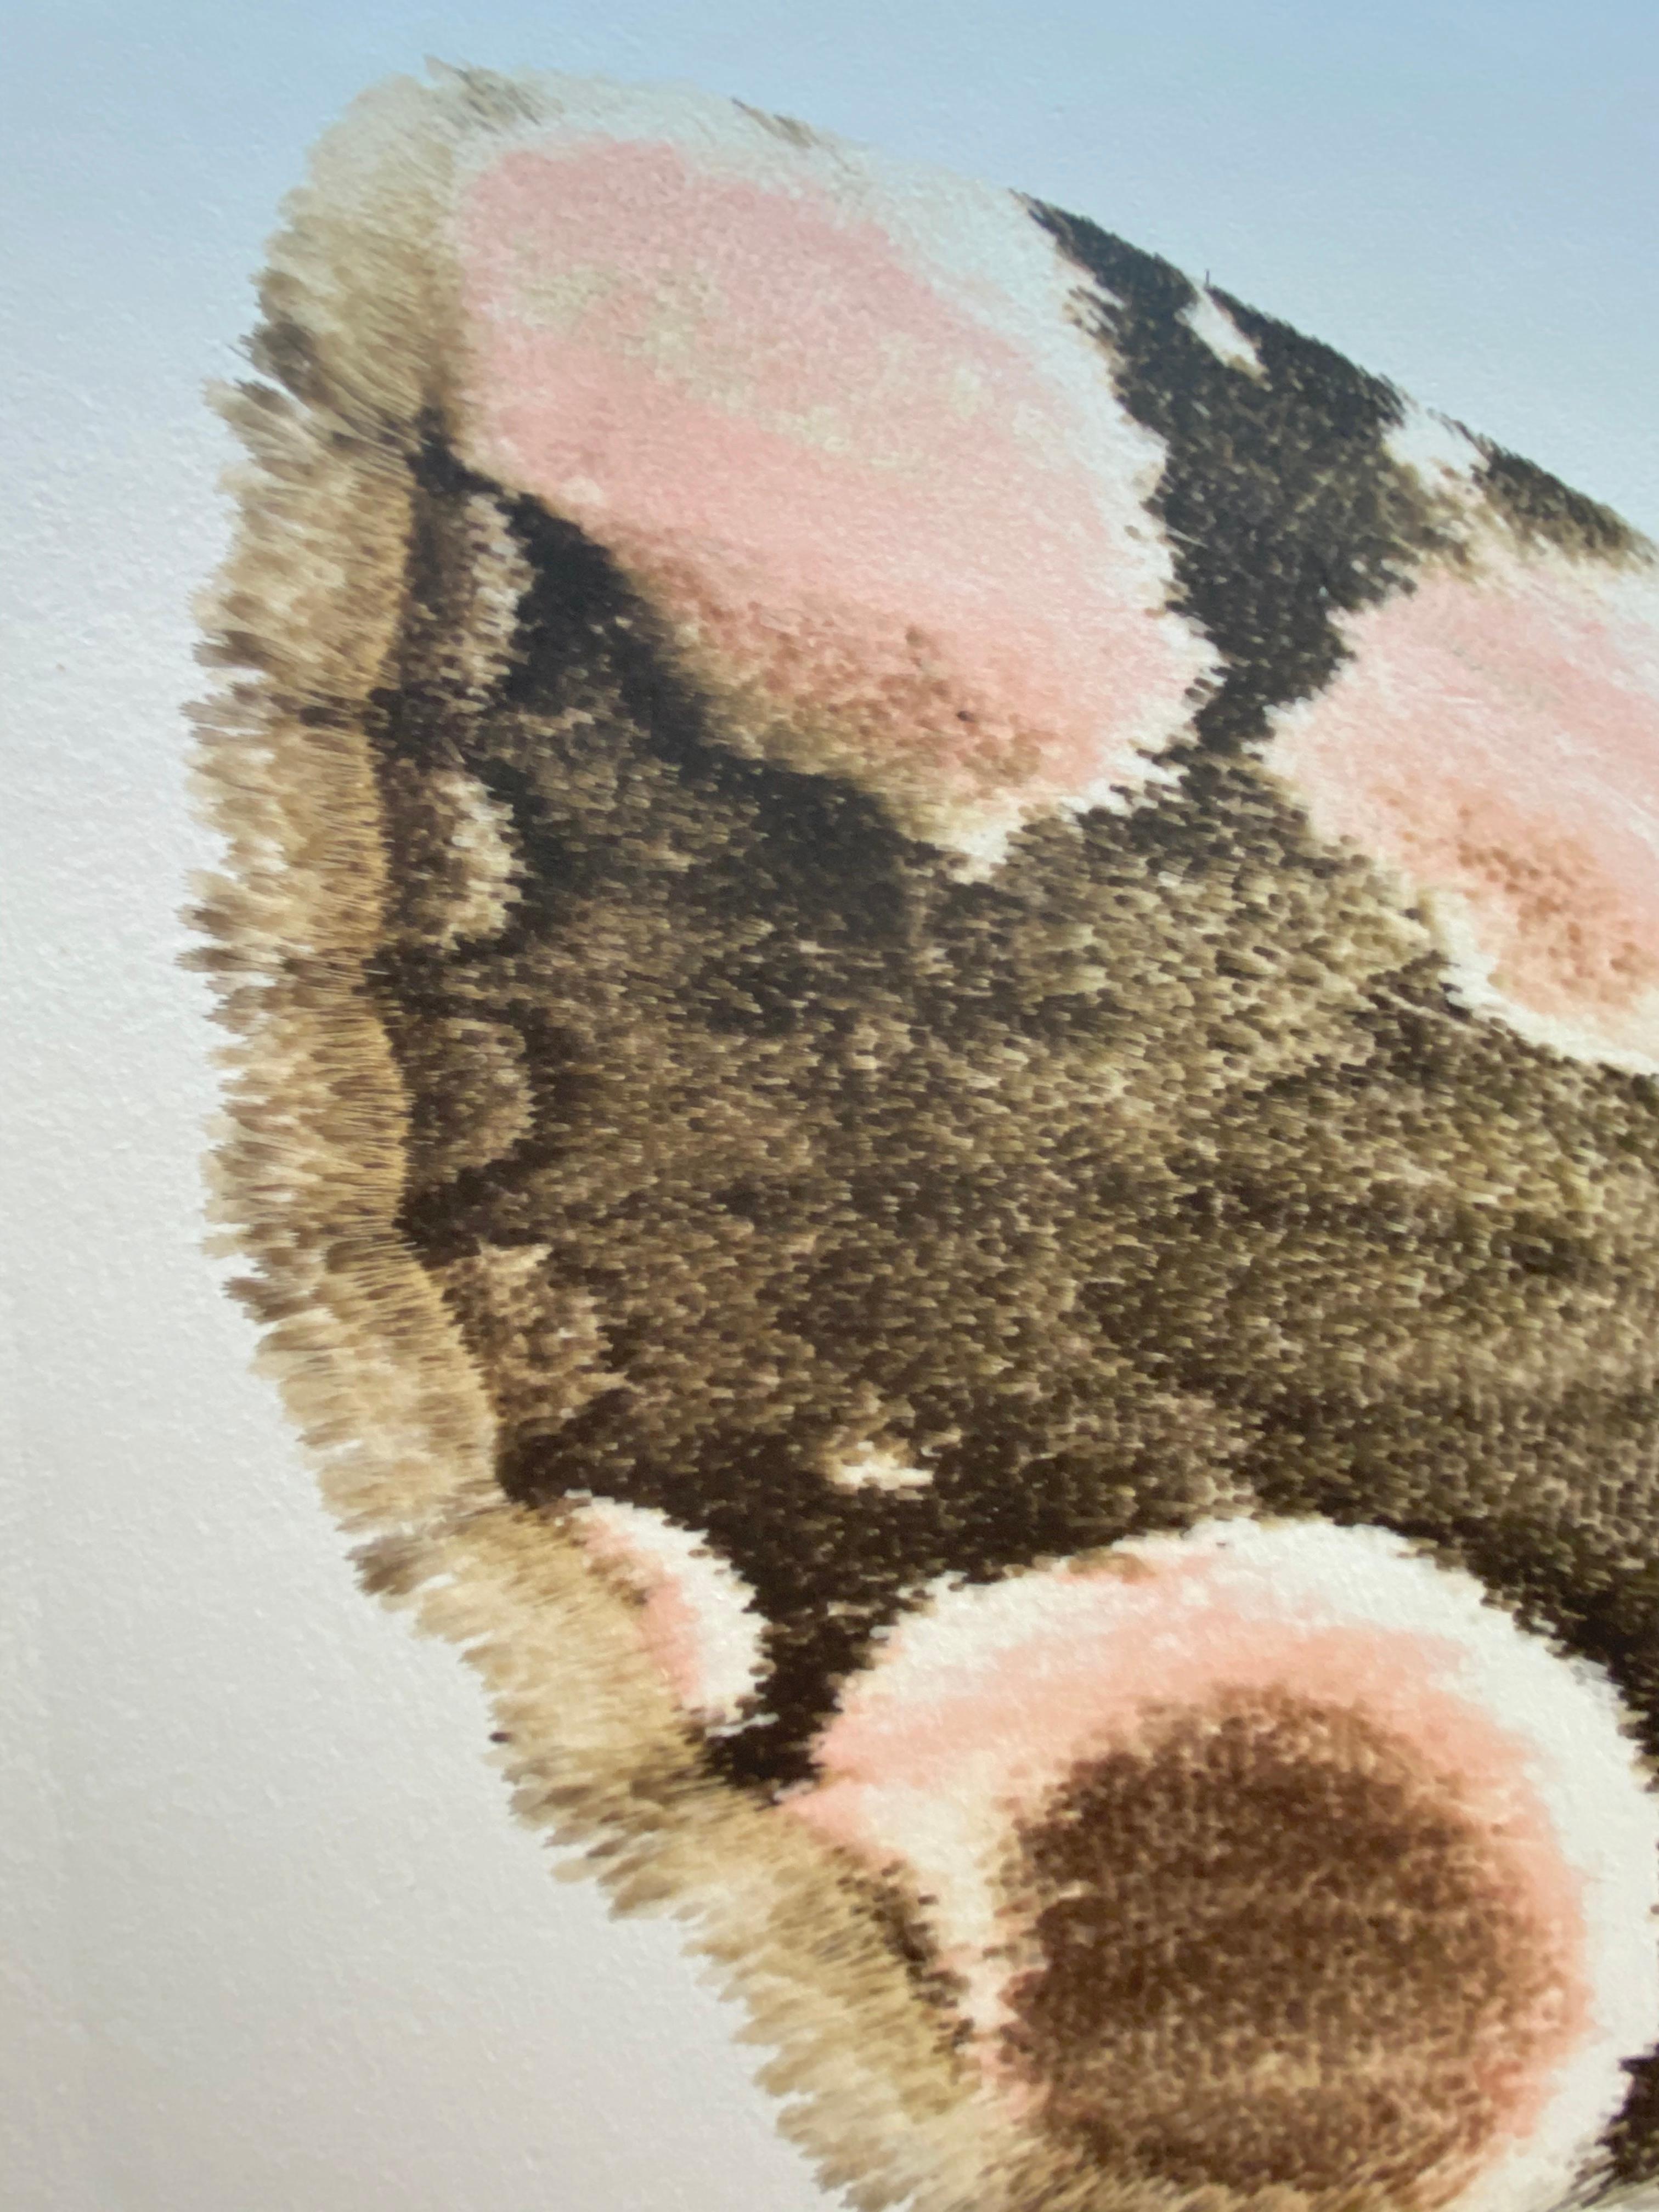 In this hyper-detailed archival pigment print on watercolor paper, a white moth with brown circular markings on its wings is dramatic against a solid white background. 

Price shown is the unframed price. Please inquire with the gallery for framing